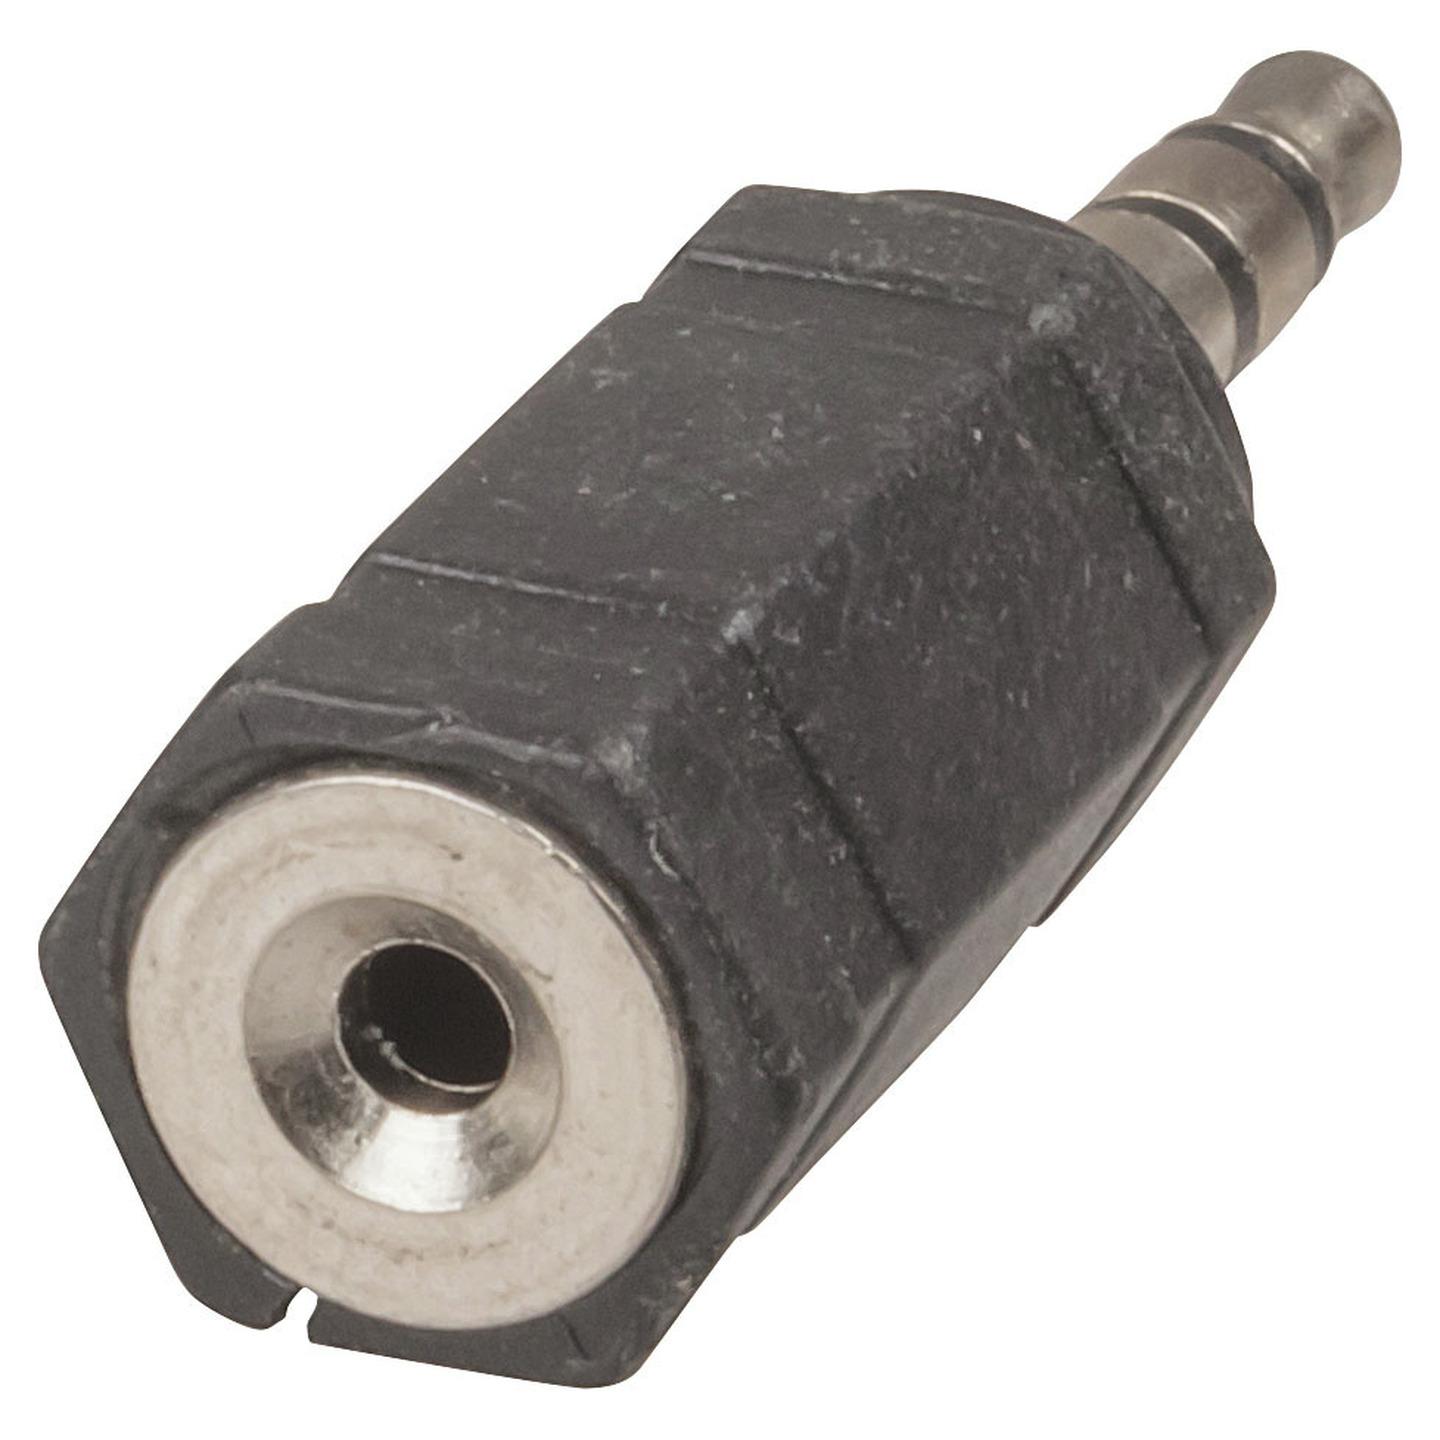 3.5mm Stereo Plug to 2.5mm Stereo Socket